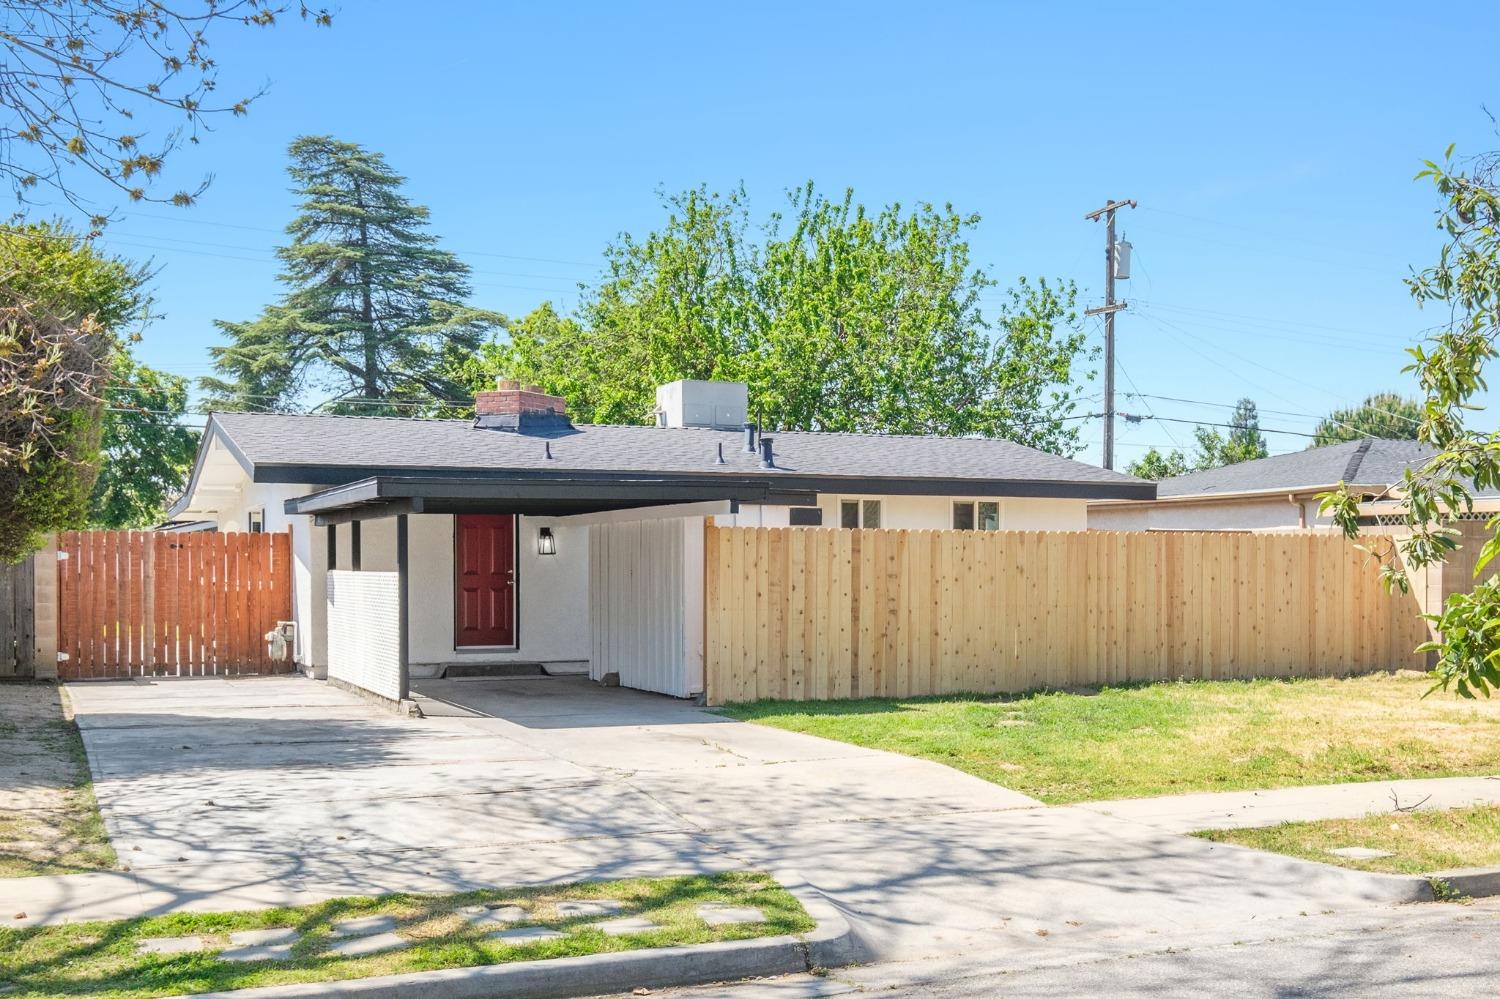 Photo of 2732 E Lansing Wy in Fresno, CA